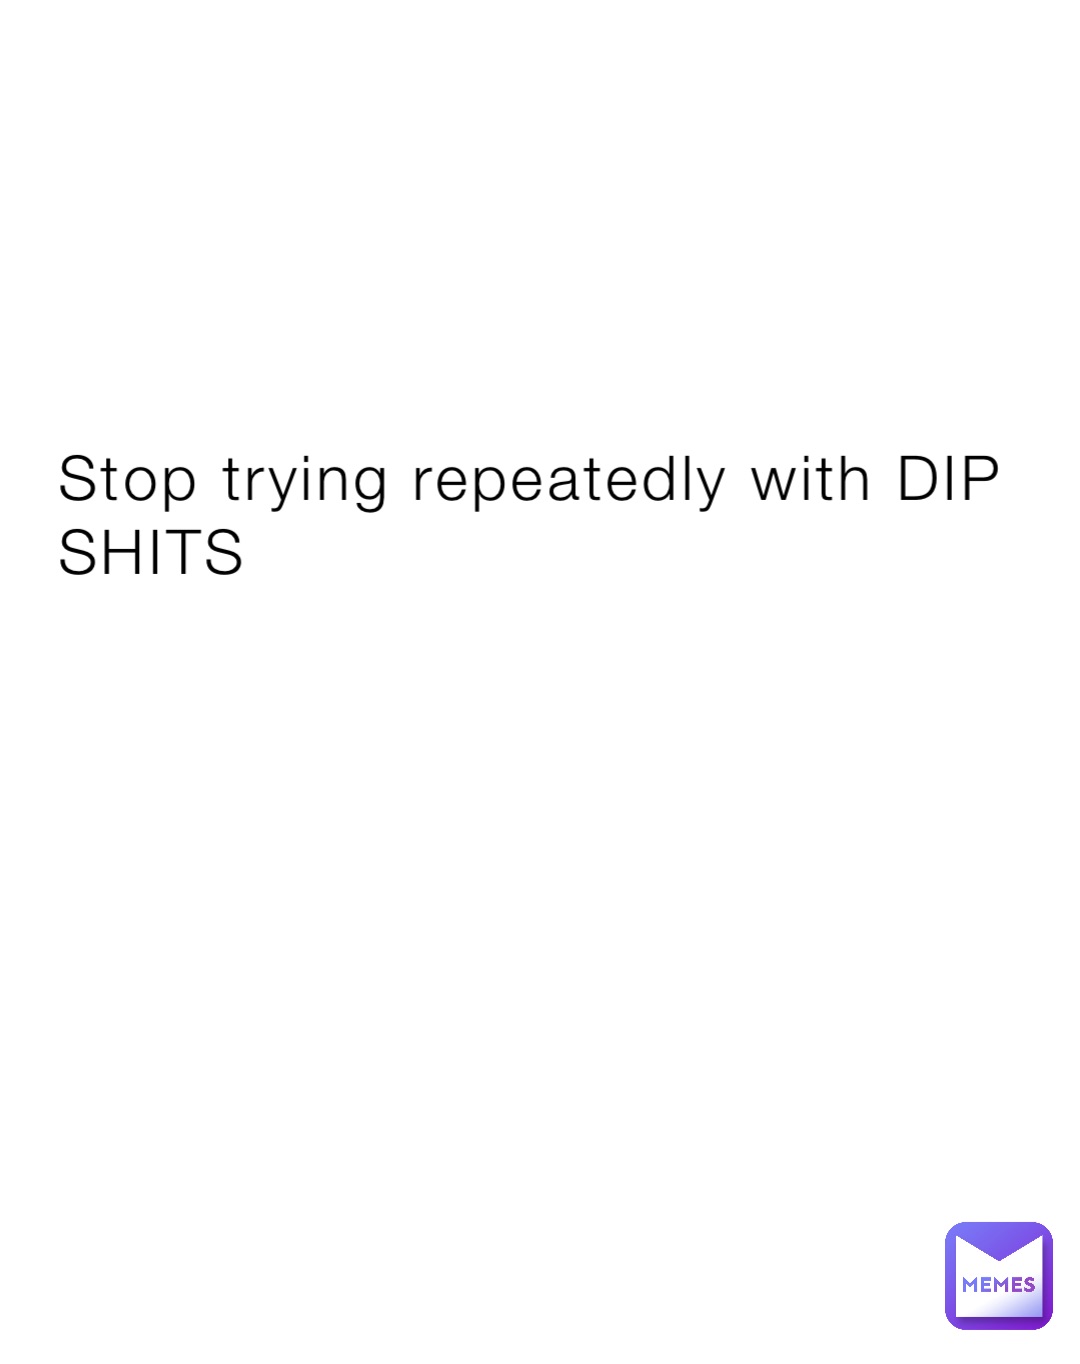 Stop trying repeatedly with DIP SHITS